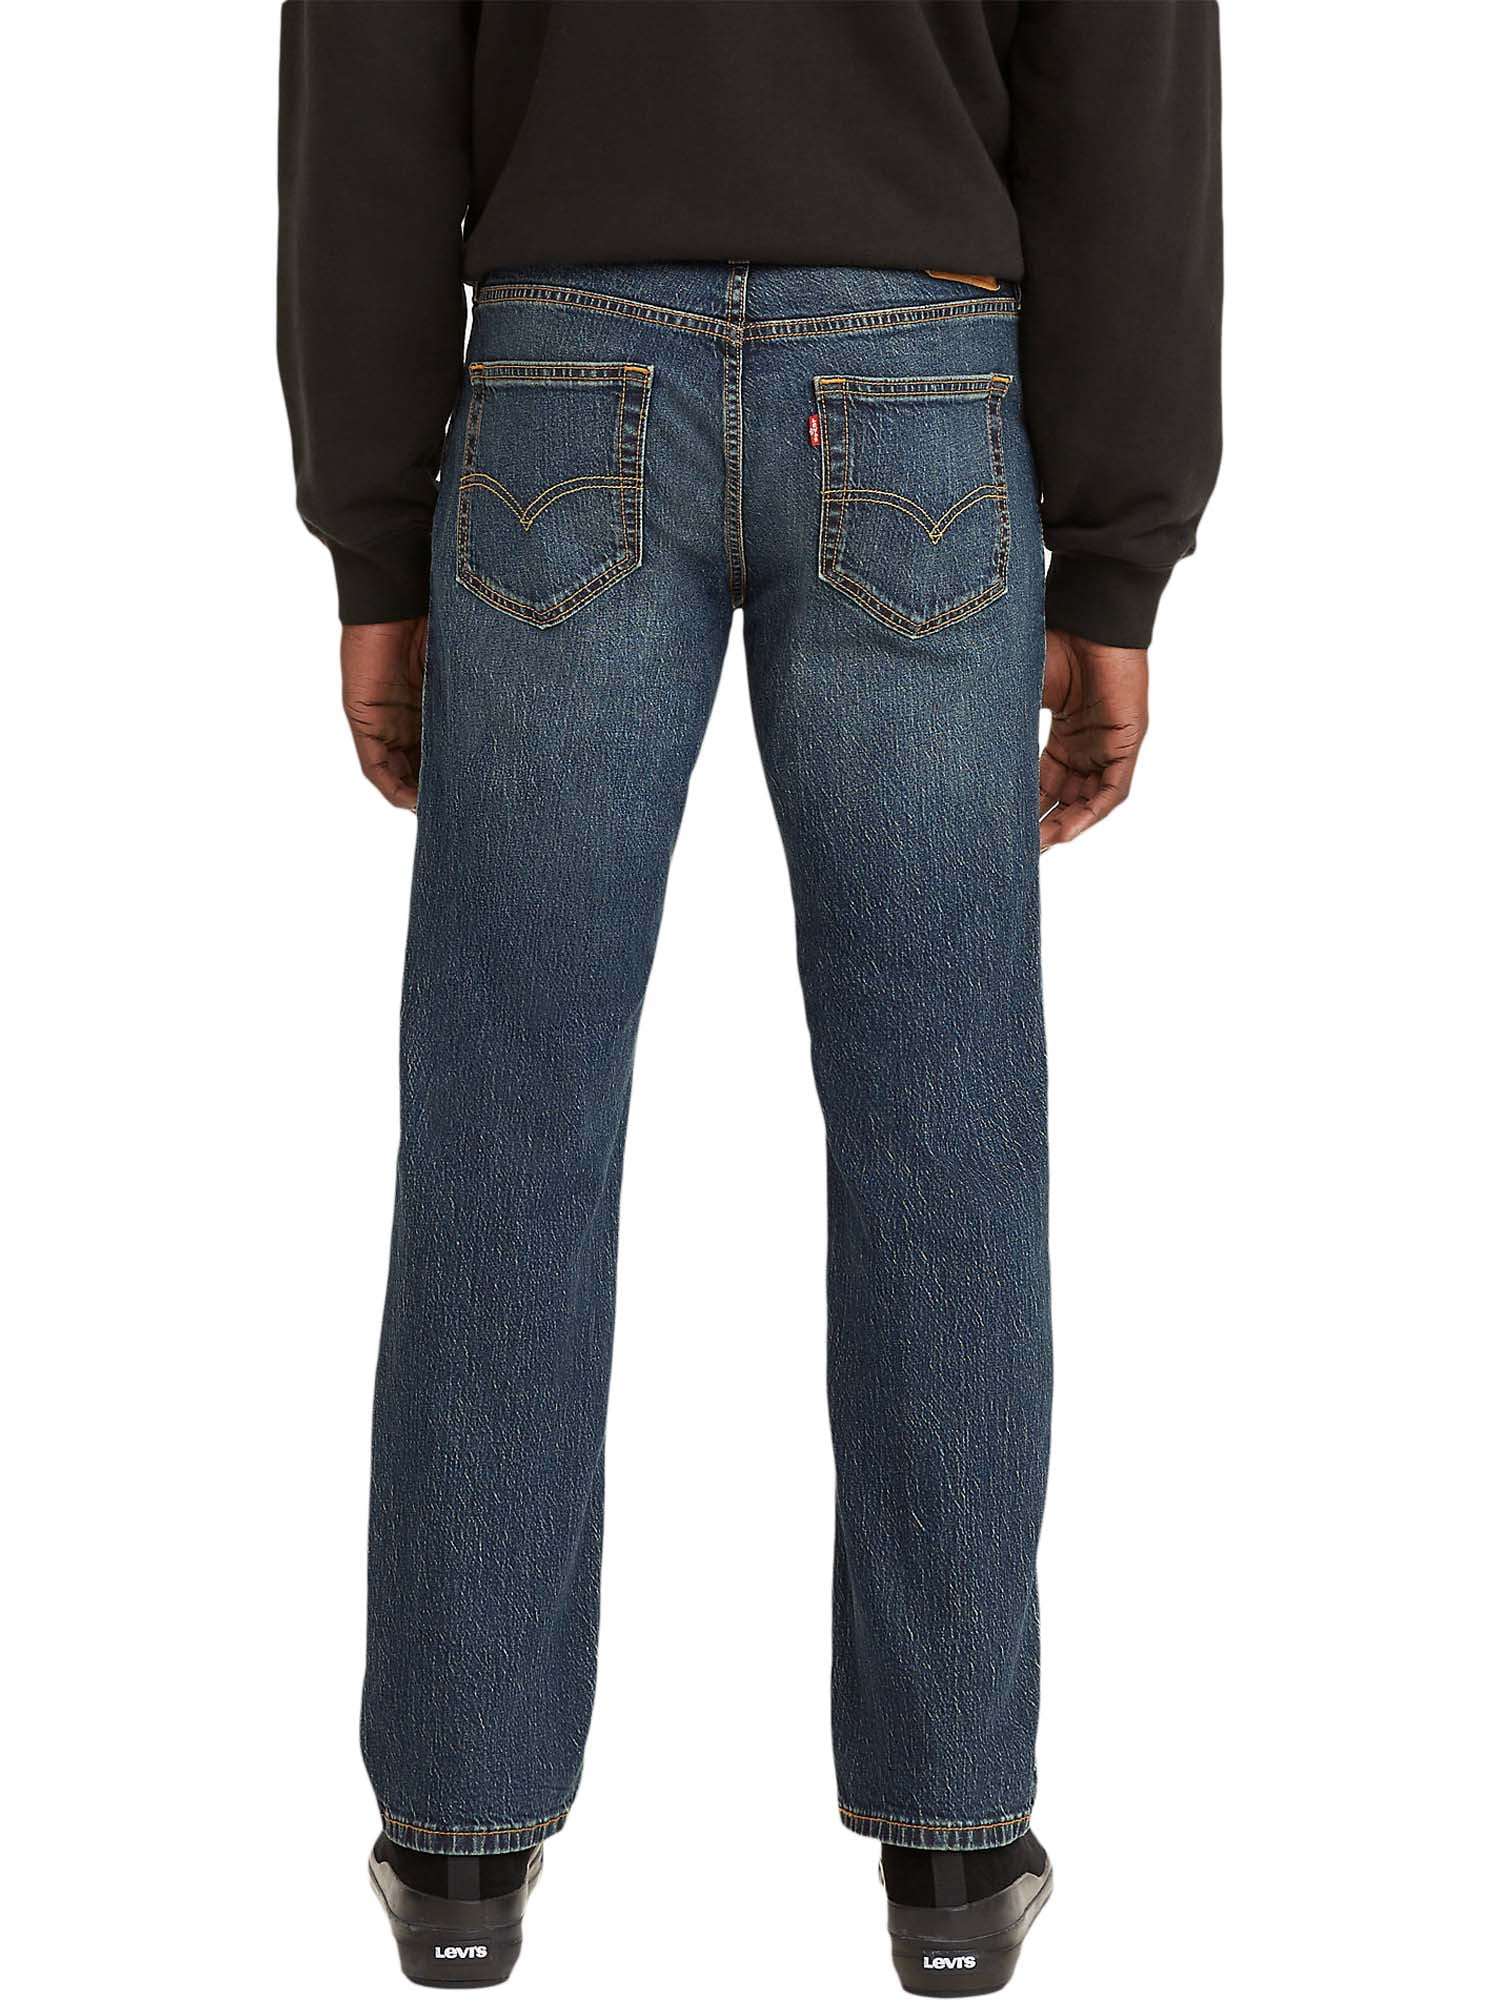 Levi's Men's 559 Relaxed Straight Fit Jeans 